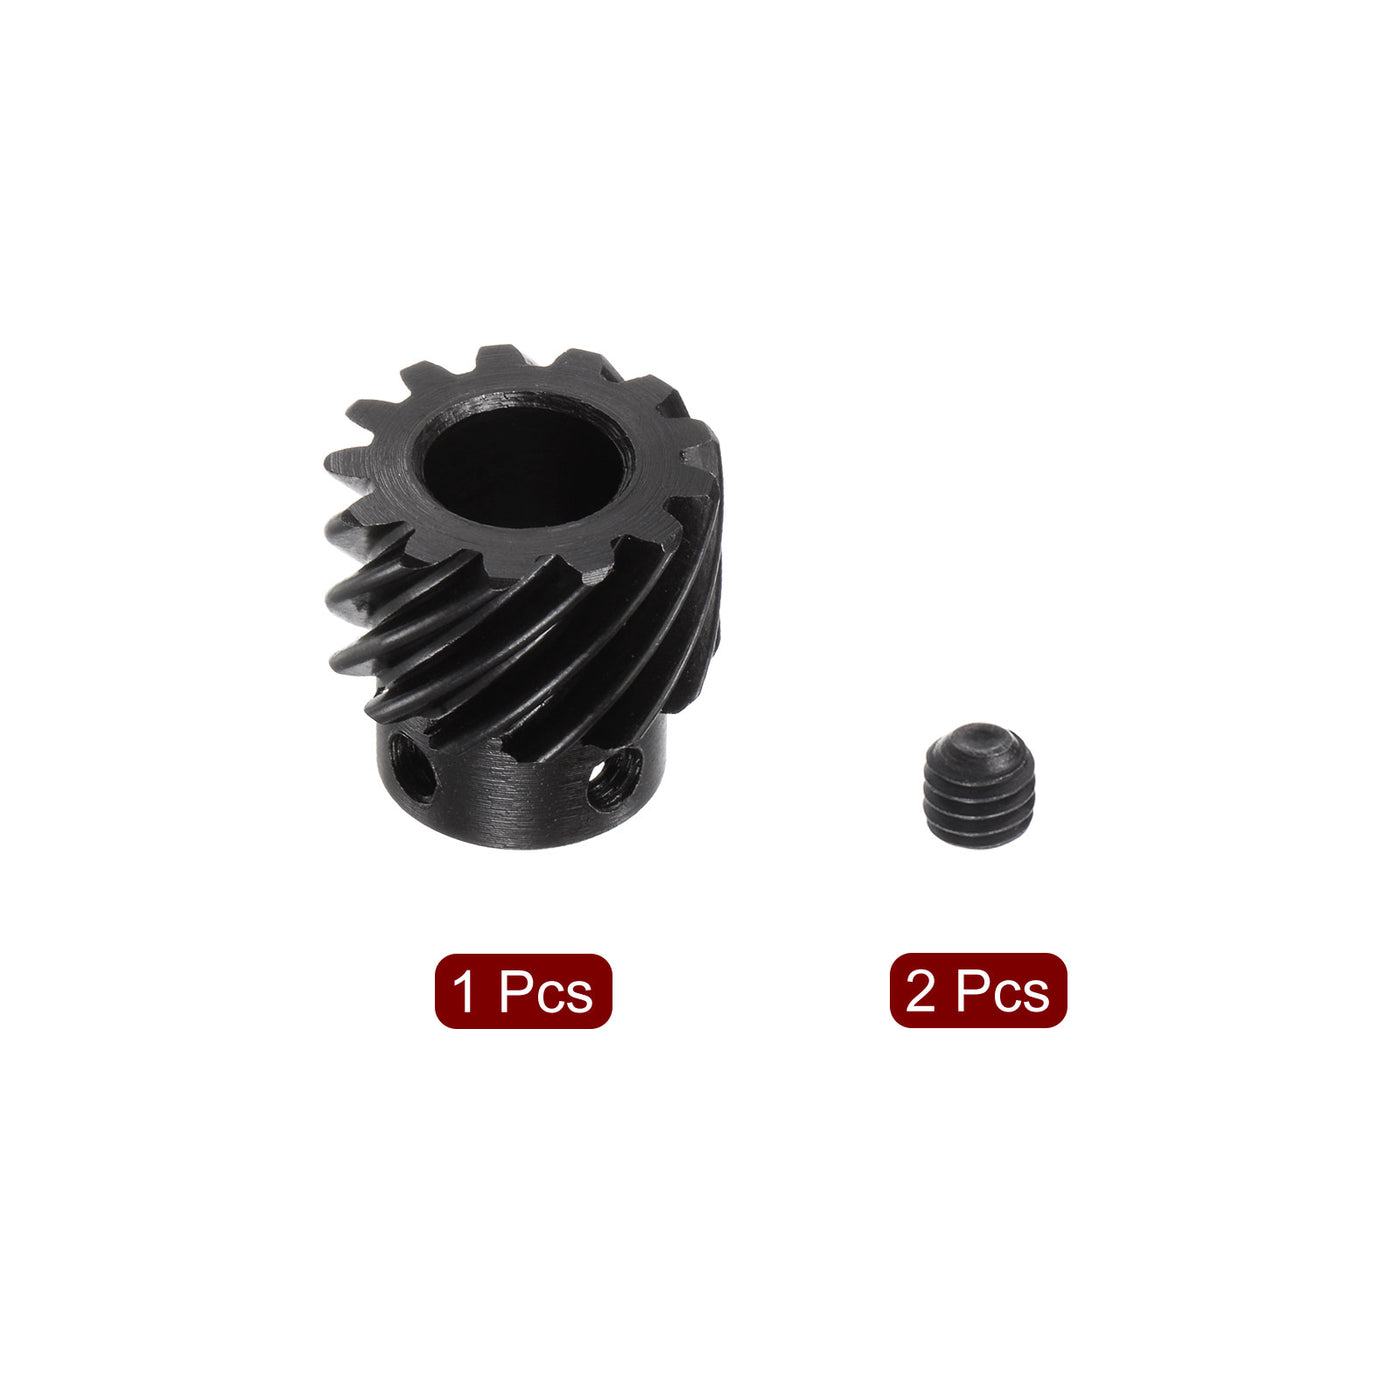 uxcell Uxcell 10mm Aperture 13T Helical Gear 1 Mod Hardened Steel Motor Gear, Right Direction